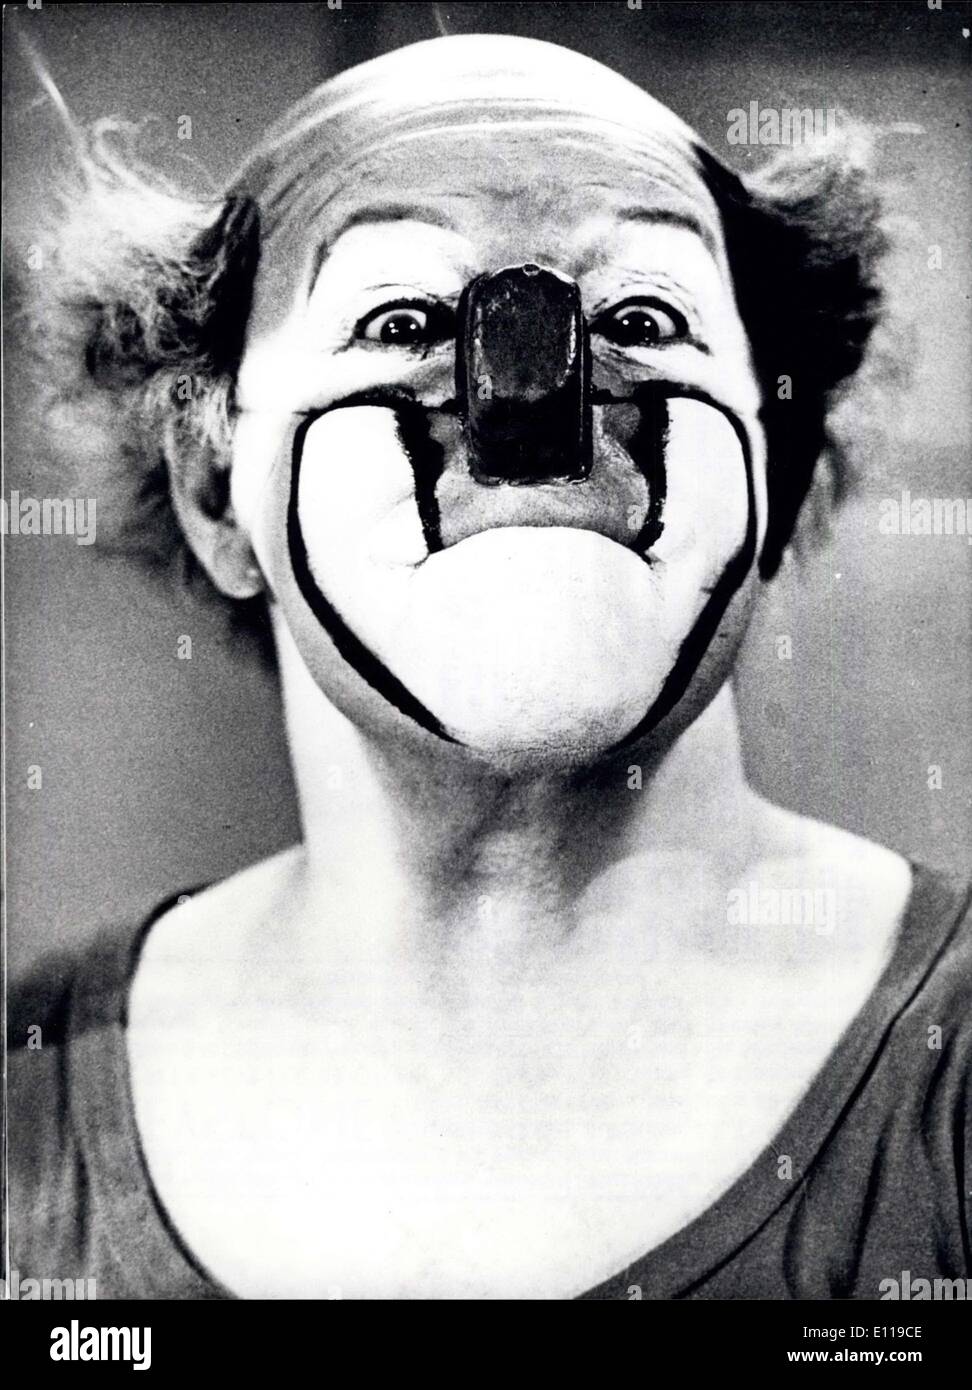 Apr. 23, 1976 - Clown Charlie Rivel will become eighty years old: On April 23rd 1976, Charles Andreu, better known as Charlie Rivel, will celebrate his 80th birthday. Charlie Rivel, one of the most famous clown of the world, was already appearing in the circus when he was nine; 1924 he came to Germany for the first time. In the beginning he had success with his imitation of Charles Chaplin but then he developed his own style. In 1931 he presented his most famous number ''Akrobat schoooon!'', at the Scala in Berlin Stock Photo